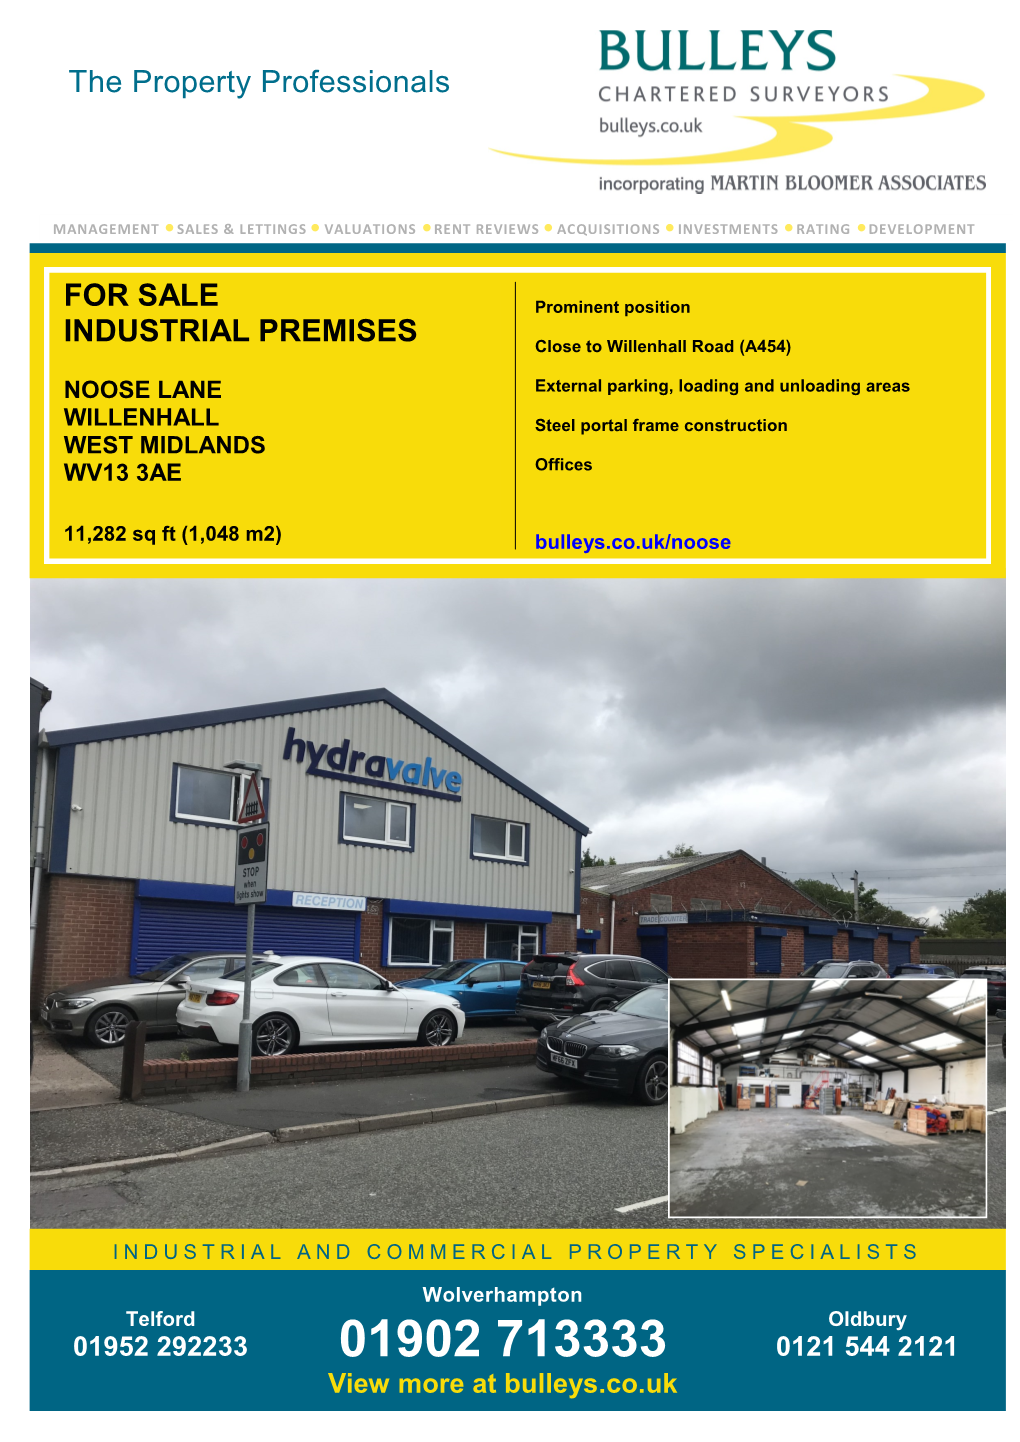 The Property Professionals for SALE INDUSTRIAL PREMISES